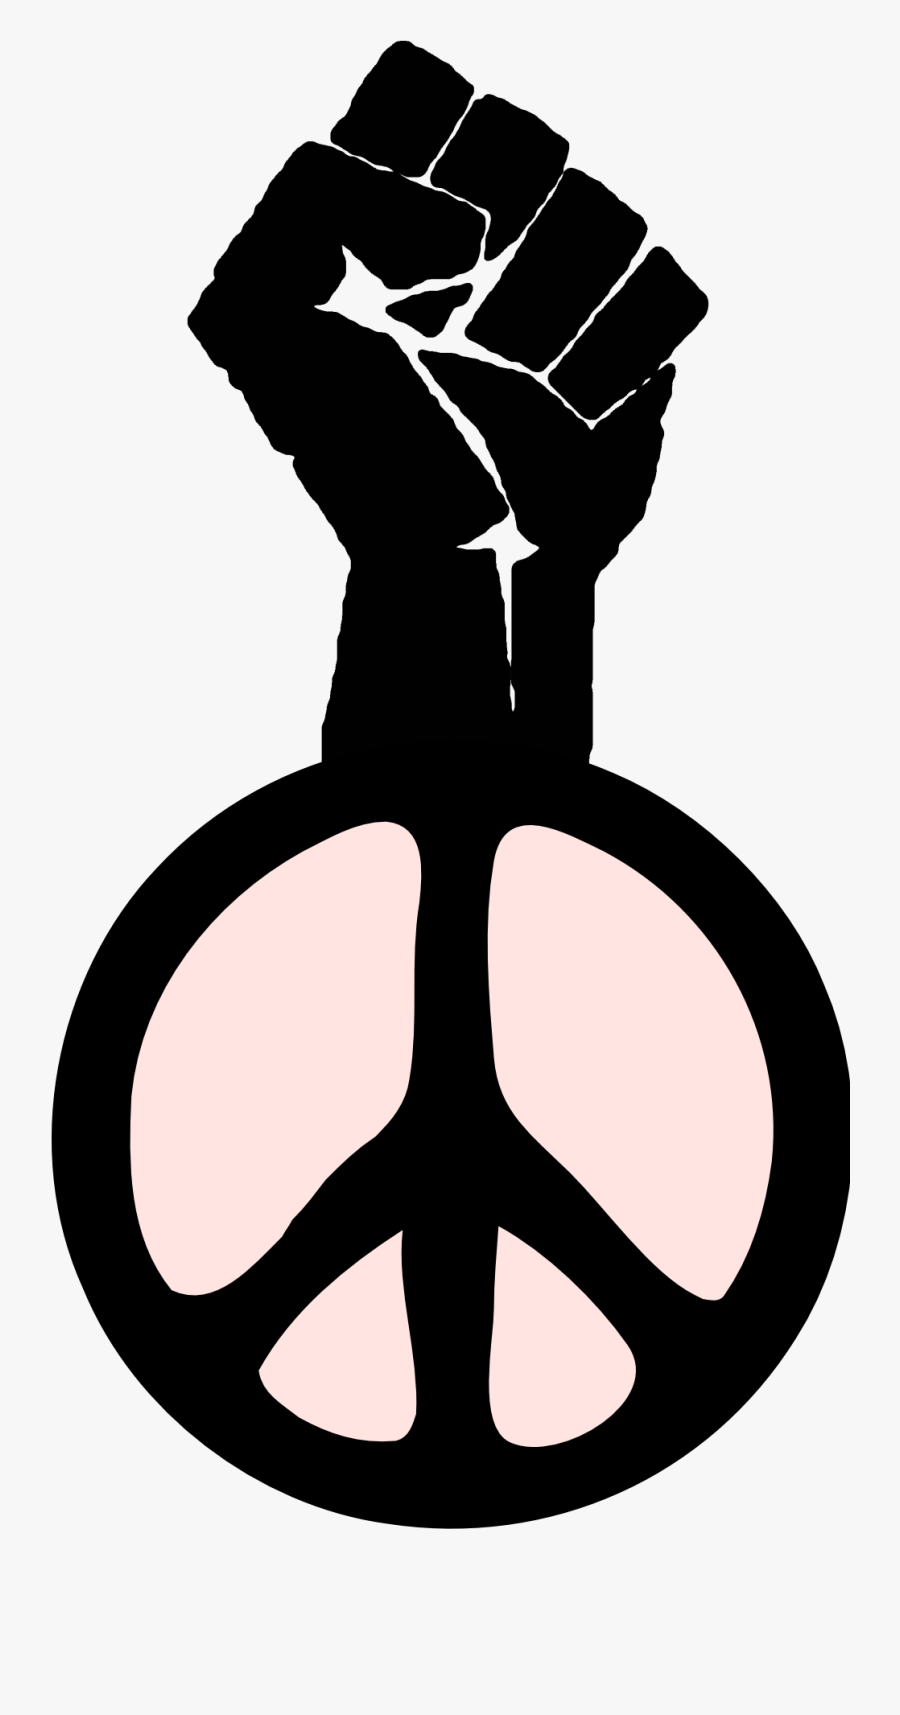 Transparent Clenched Fist Clipart - Black Power Fist With Peace Sign, Transparent Clipart